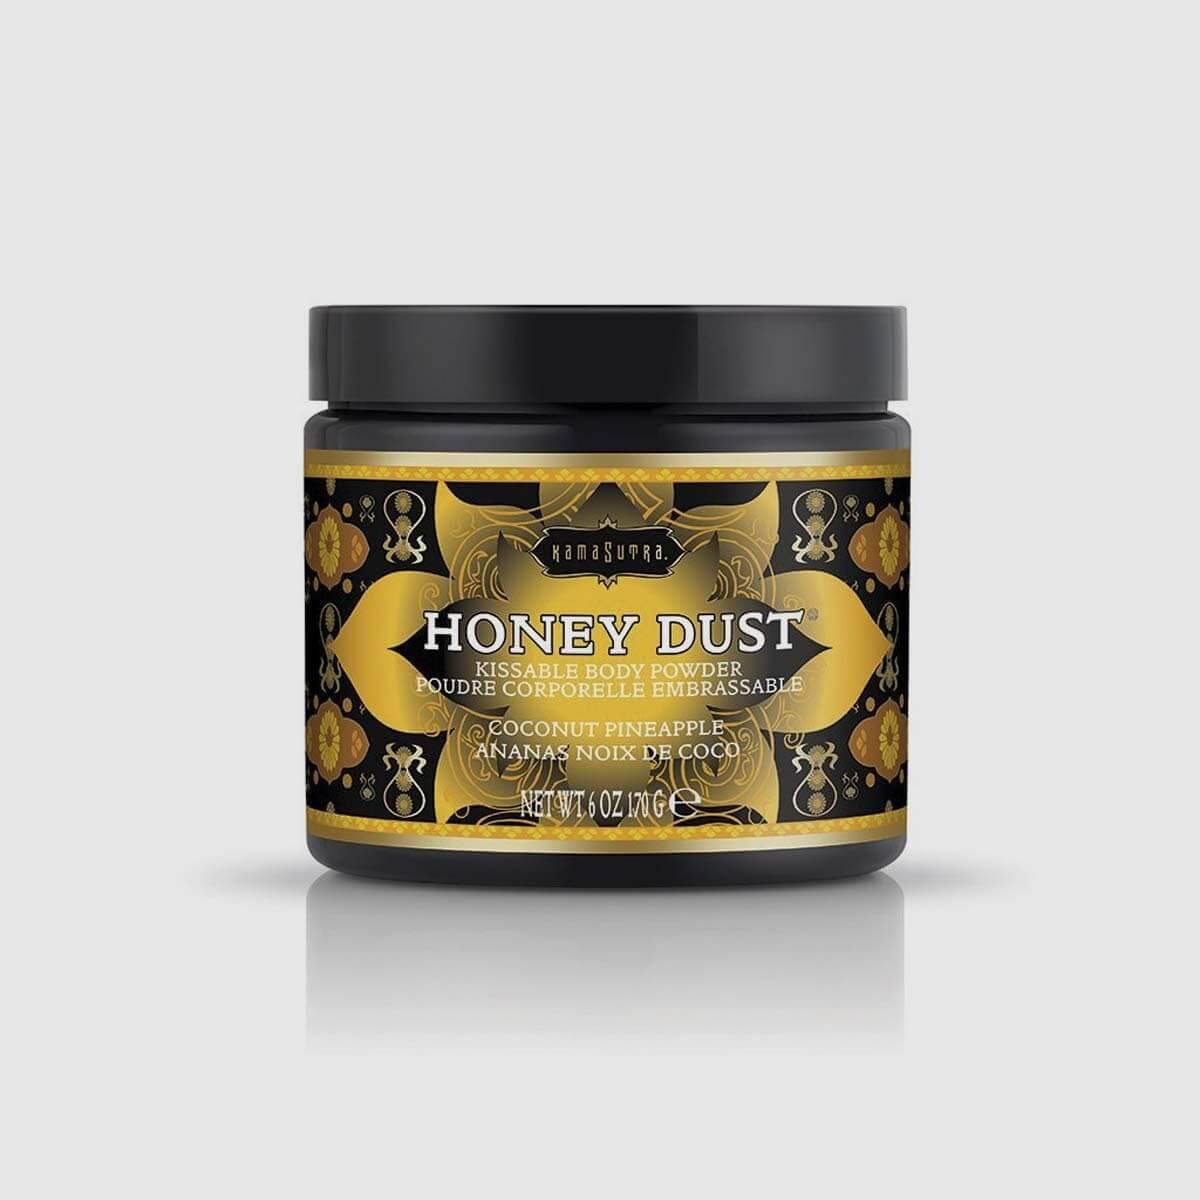 Kama Sutra Naughty Honey Dust Body Power - Coconut Pineapple, 6.0oz/170gr - Thorn & Feather Sex Toy Canada